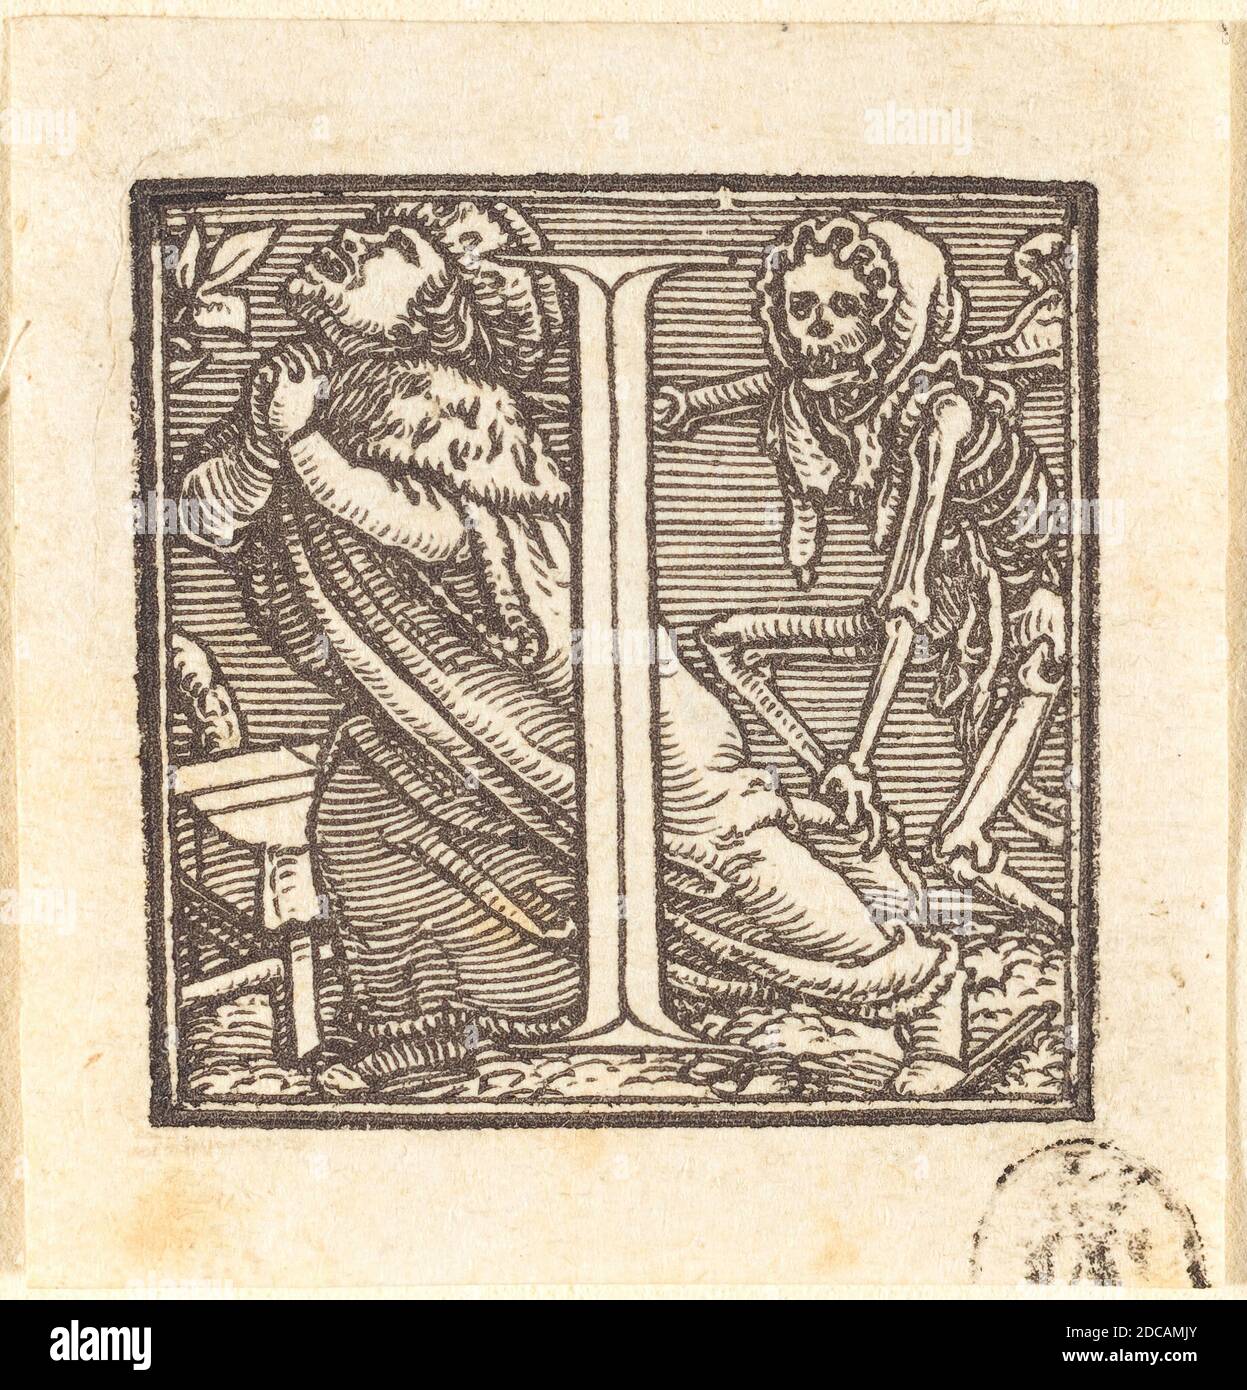 Hans Holbein the Younger, (artist), German, 1497/1498 - 1543, Letter I, Alphabet of Death, (series), woodcut Stock Photo